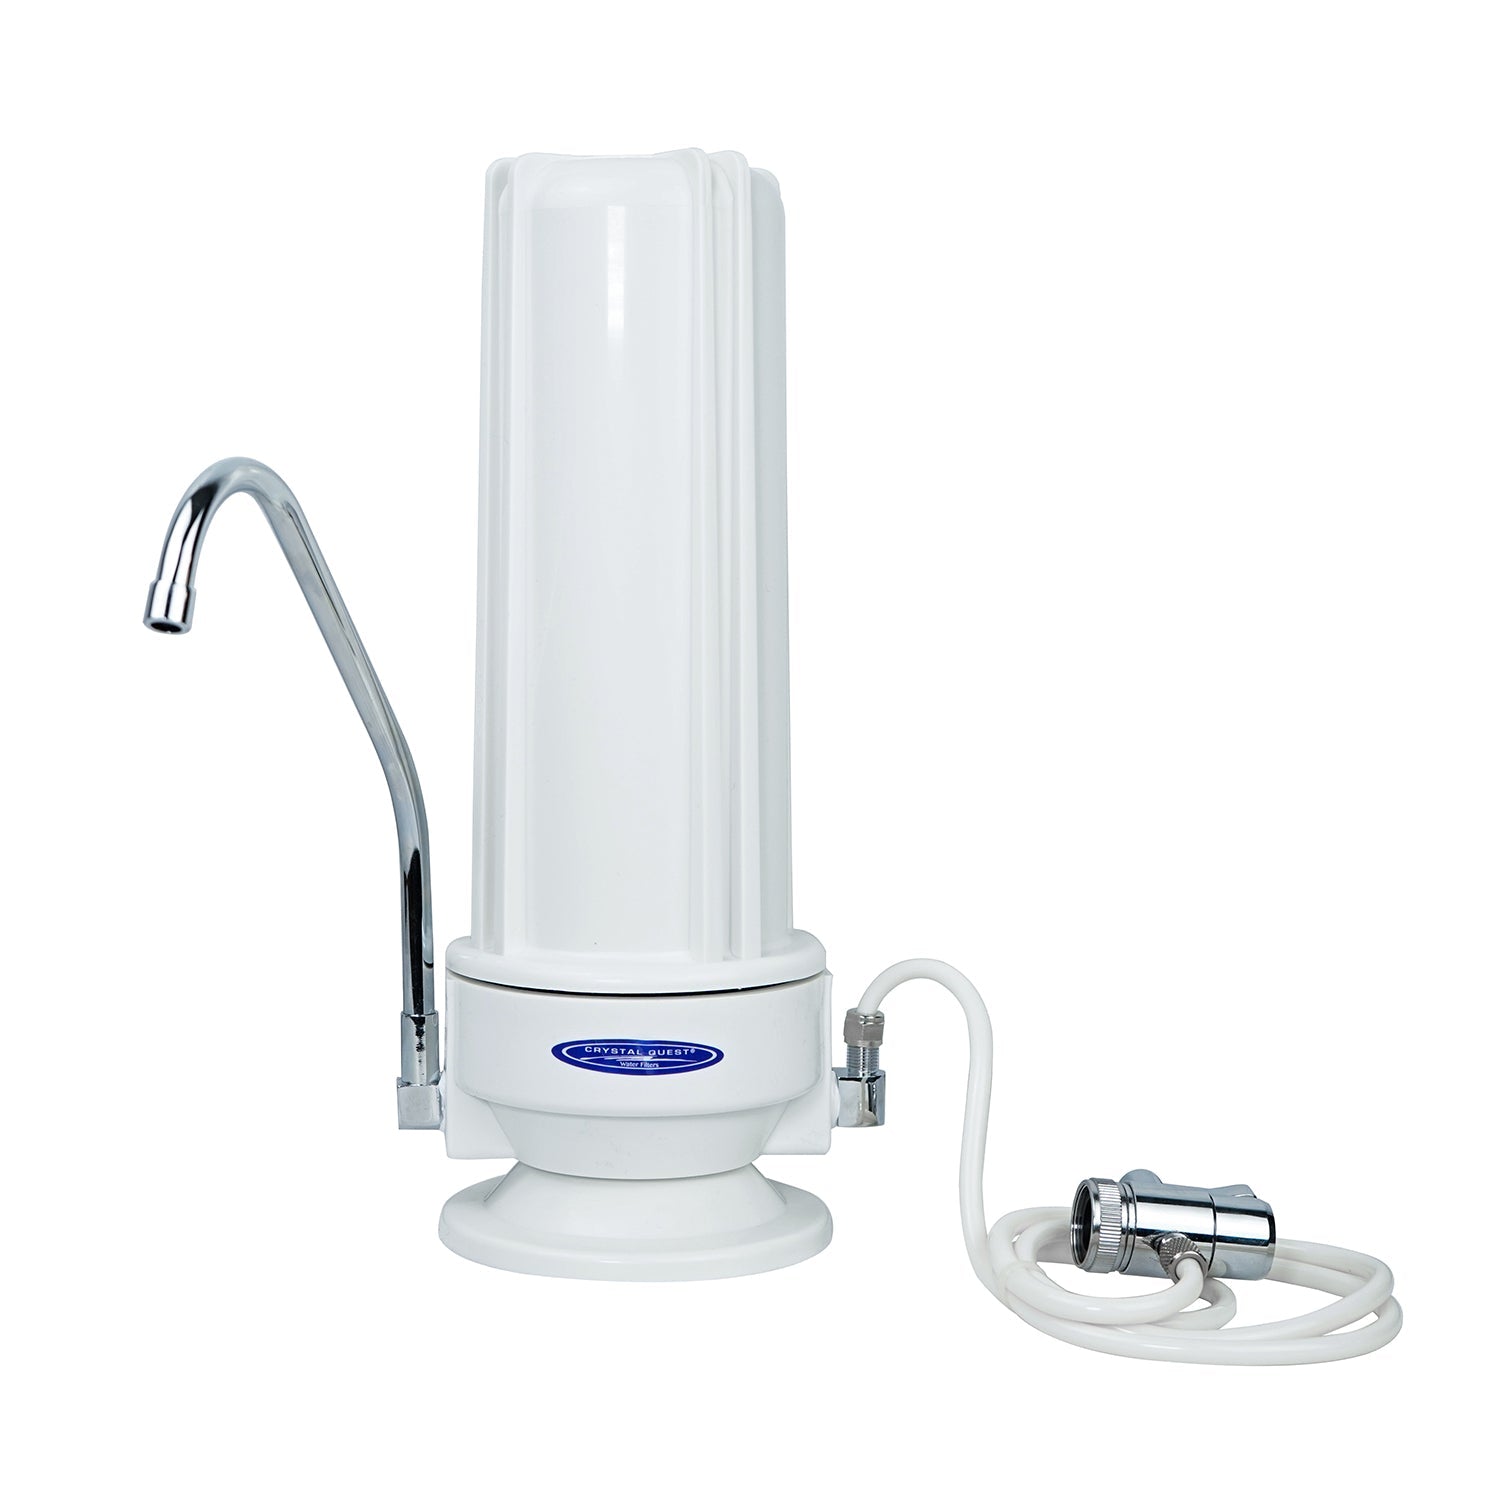 Crystal Quest Ceramic Countertop Water Filter System Single Polypropylene